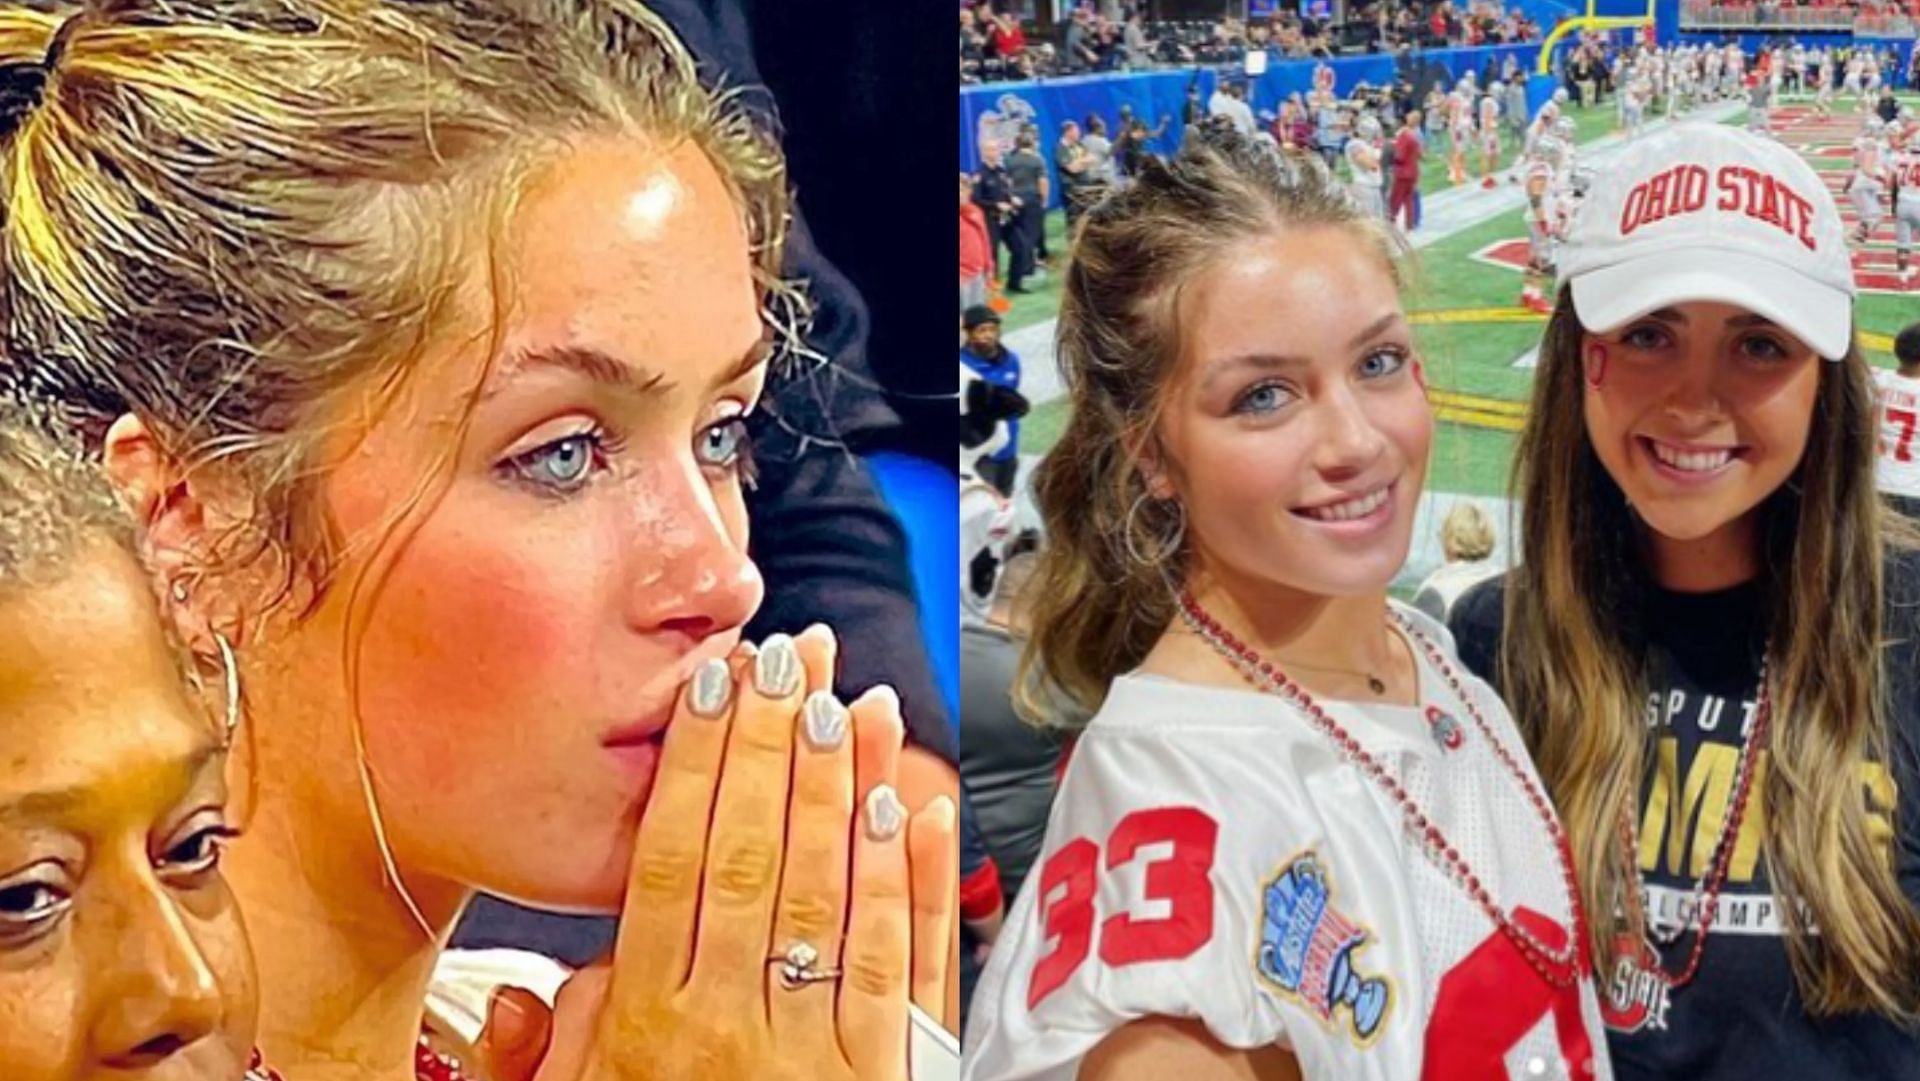 The identity of Ohio State fan Peach Bowl Girl who went viral, has been revealed as Xavier University lacrosse player Catherine Gurd. (Image via Instagram/@ESPN, catherinegurd)